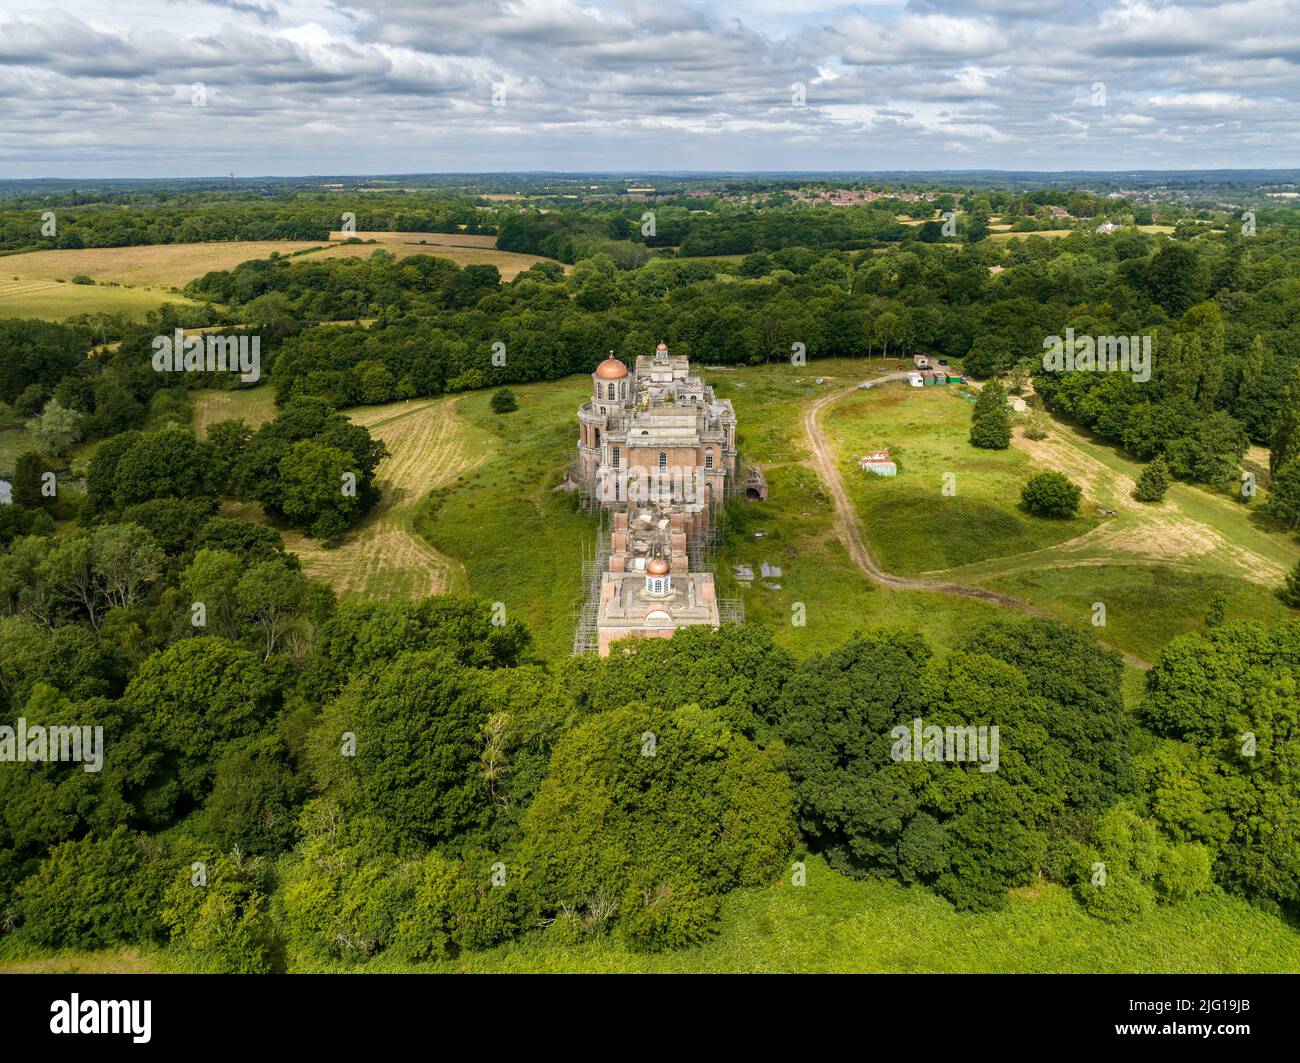 Hamilton Palace near Uckfield, East Sussex, the property belonging to landlord and property baron Nicholas Van Hoogstraten.  abandoned Sussex mansion. Stock Photo